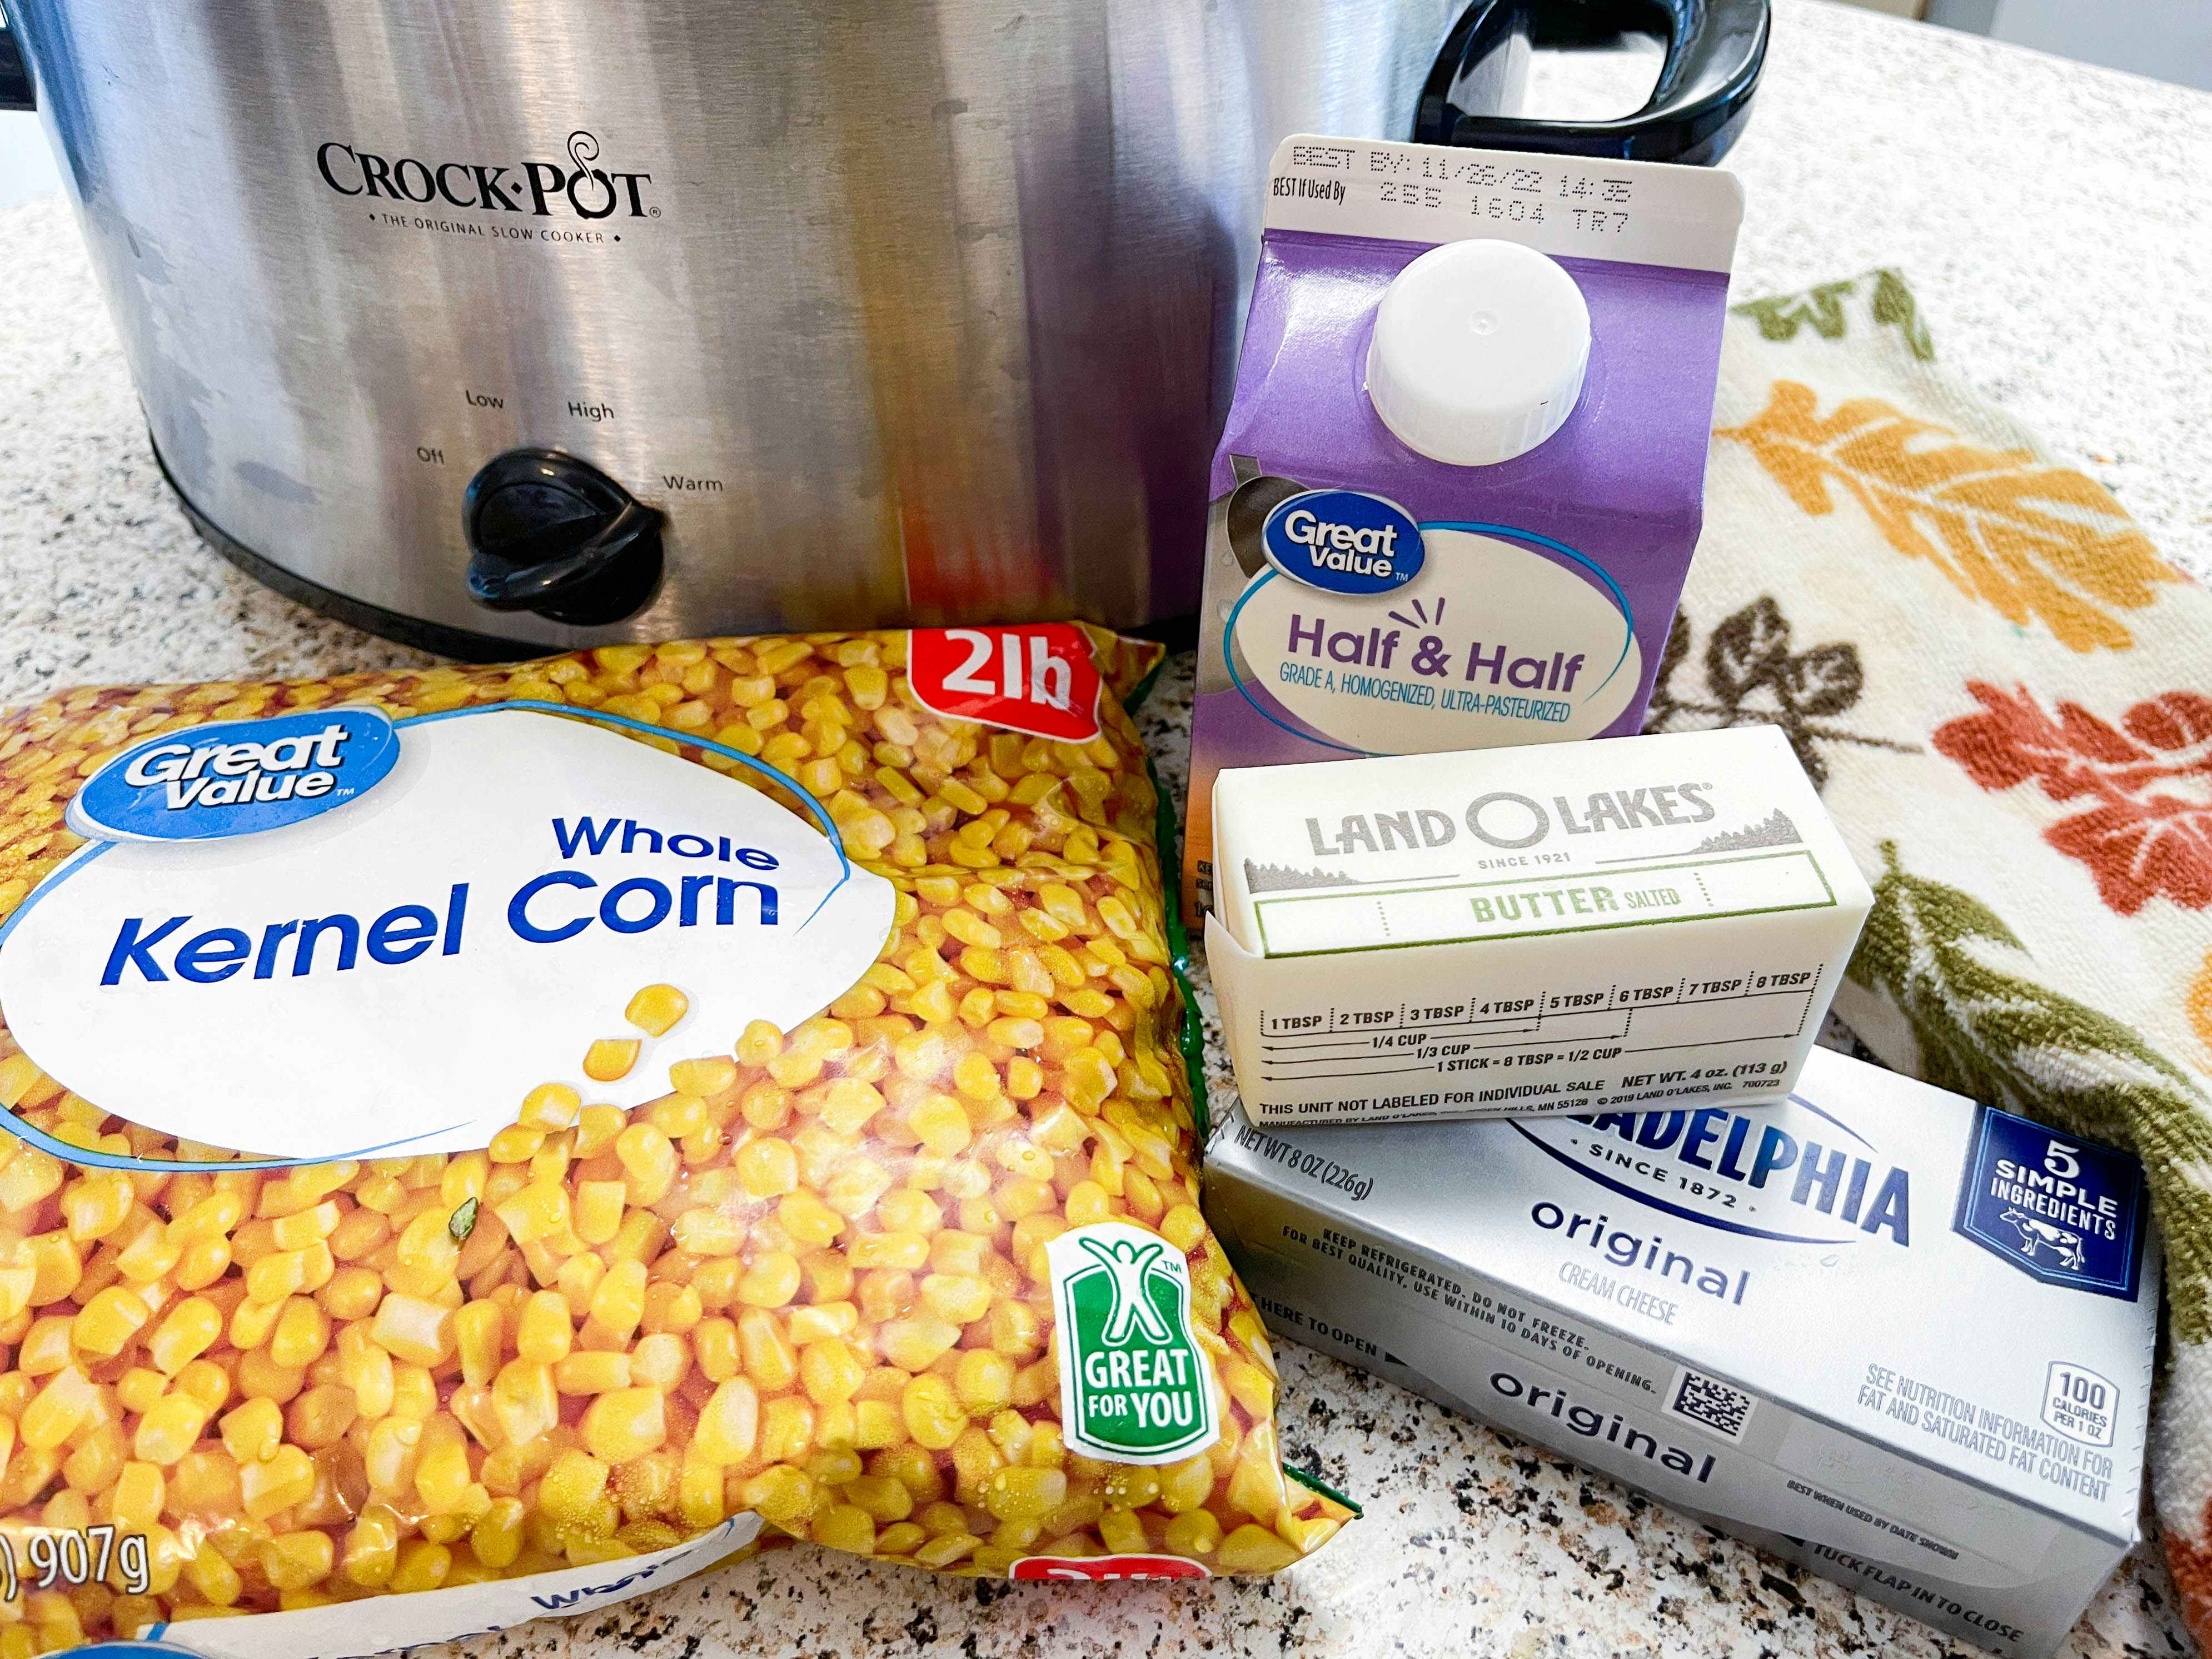 A mix of ingredients for creamed corn in front of a crock pot